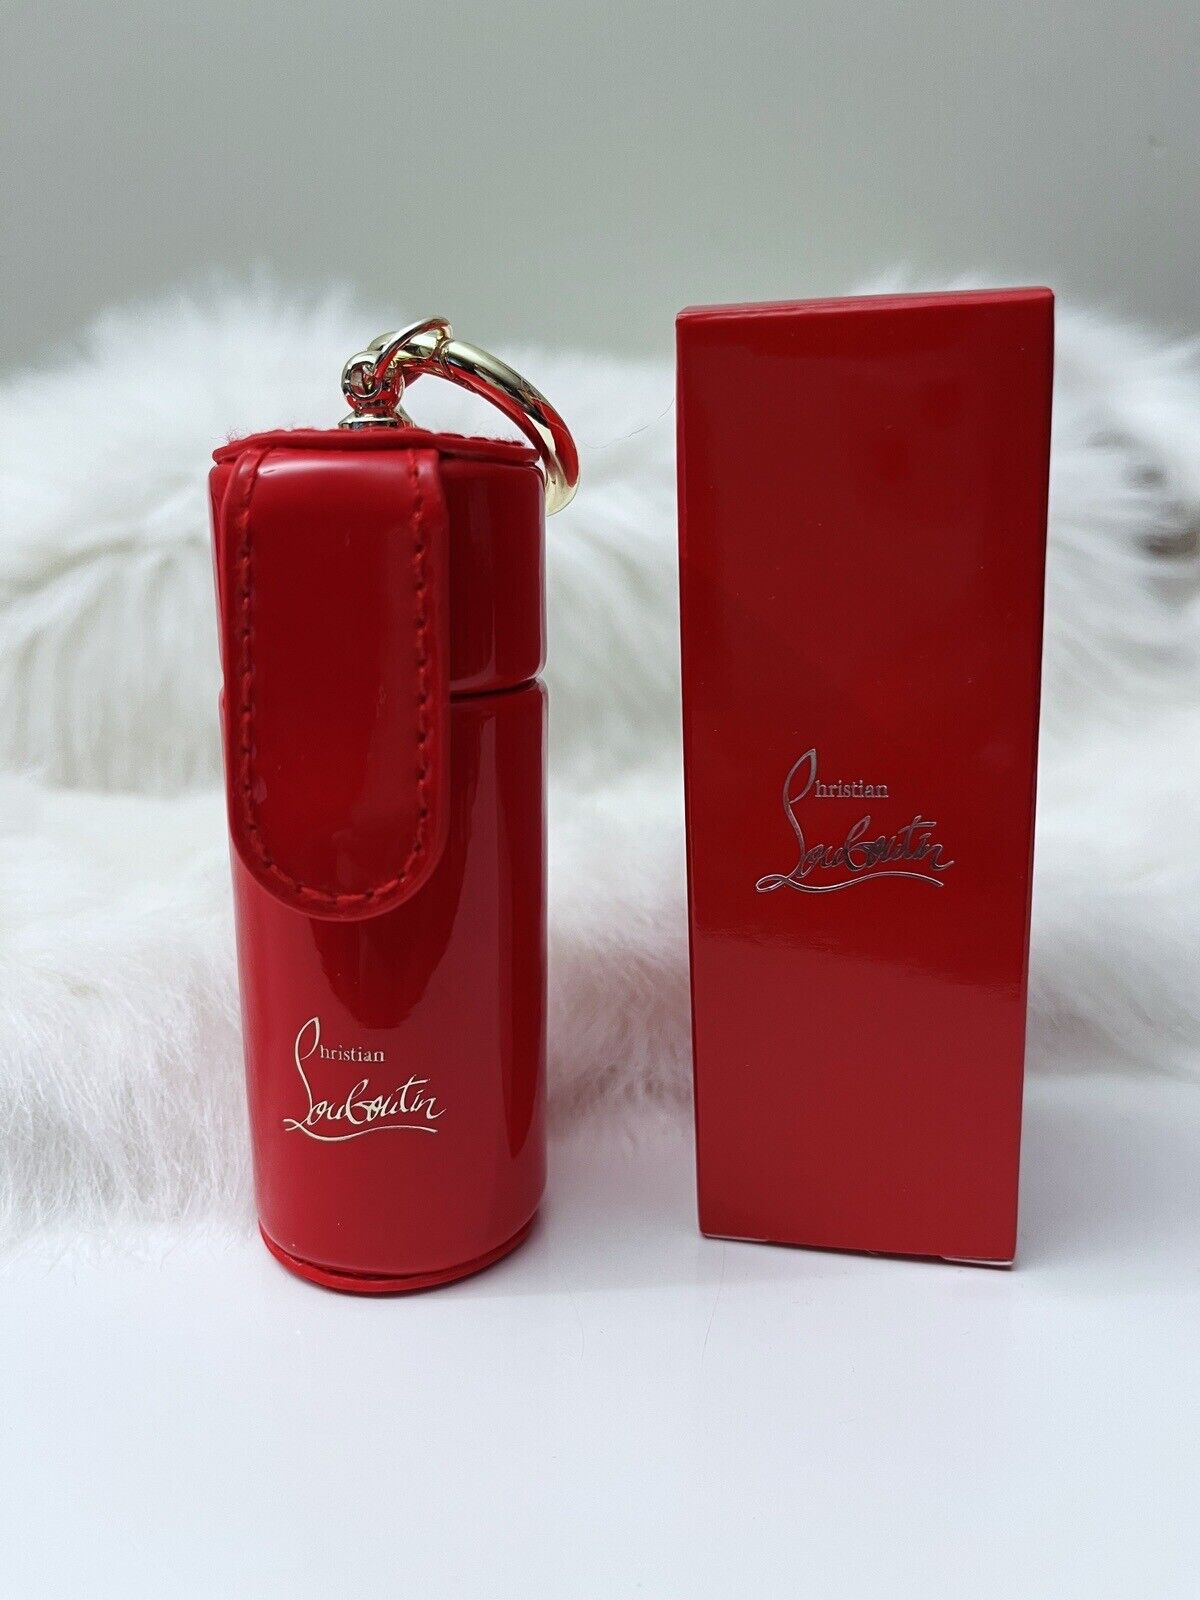 New Christian Louboutin Patent Leather Lipstick Case Collectible